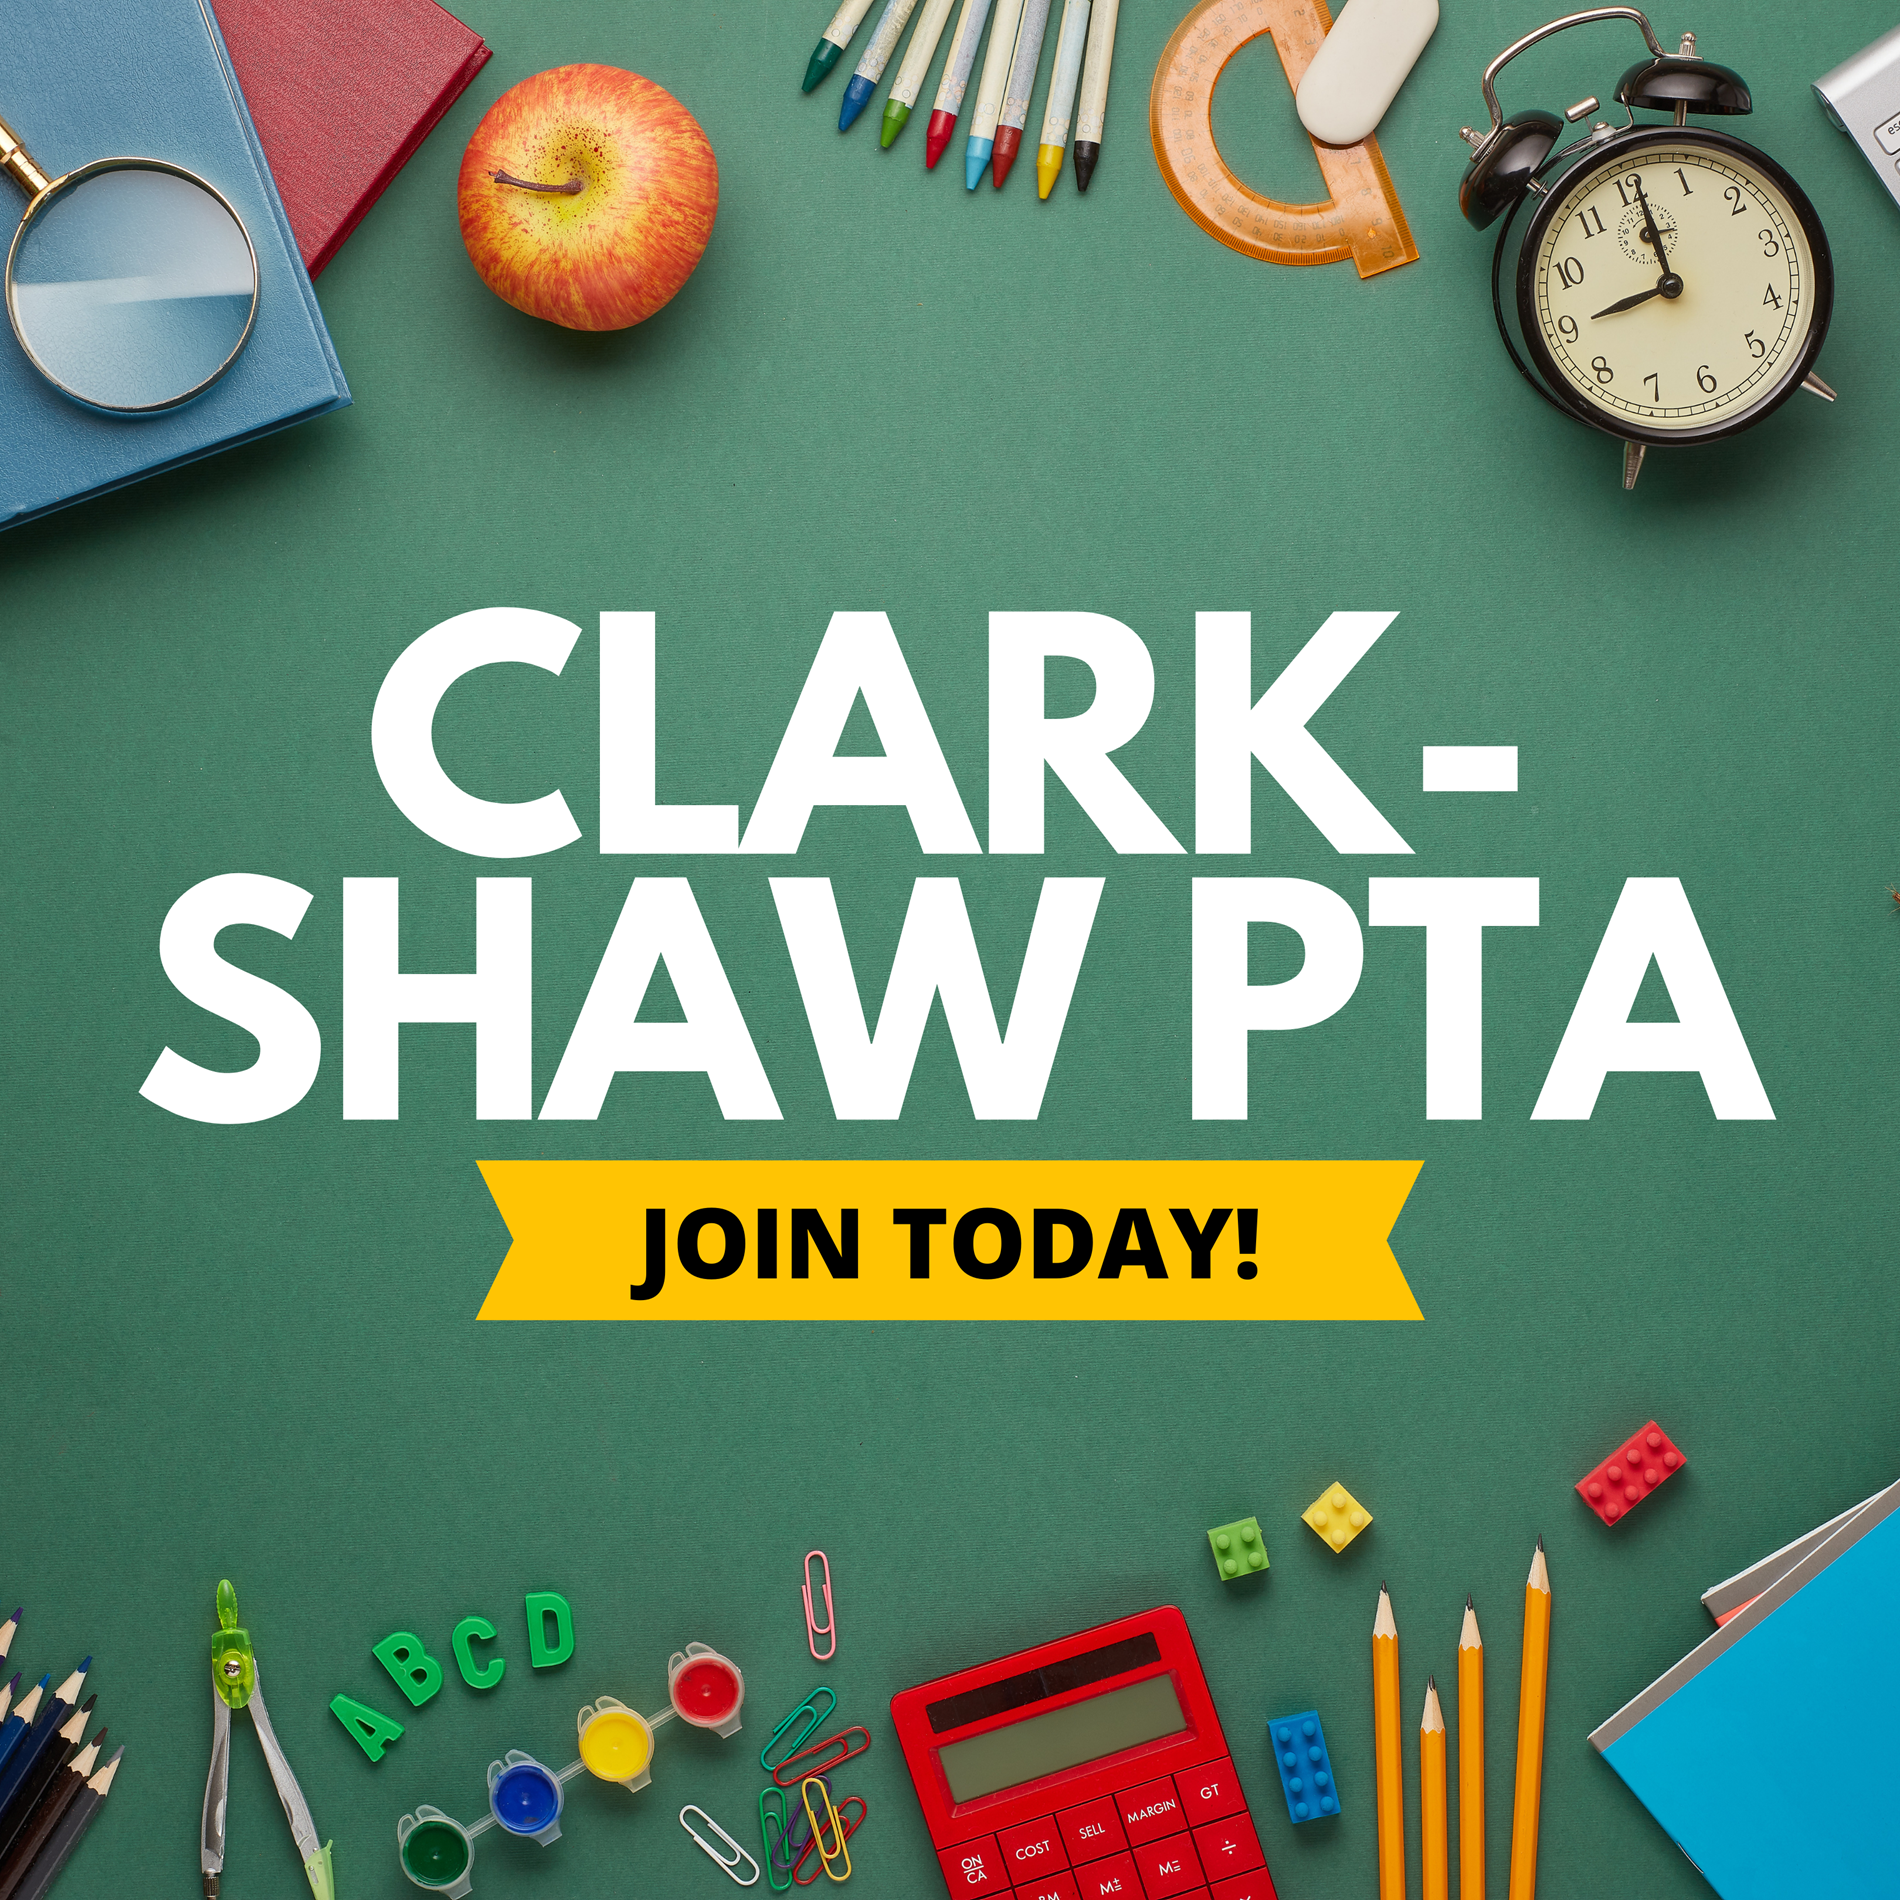 join the PTA image